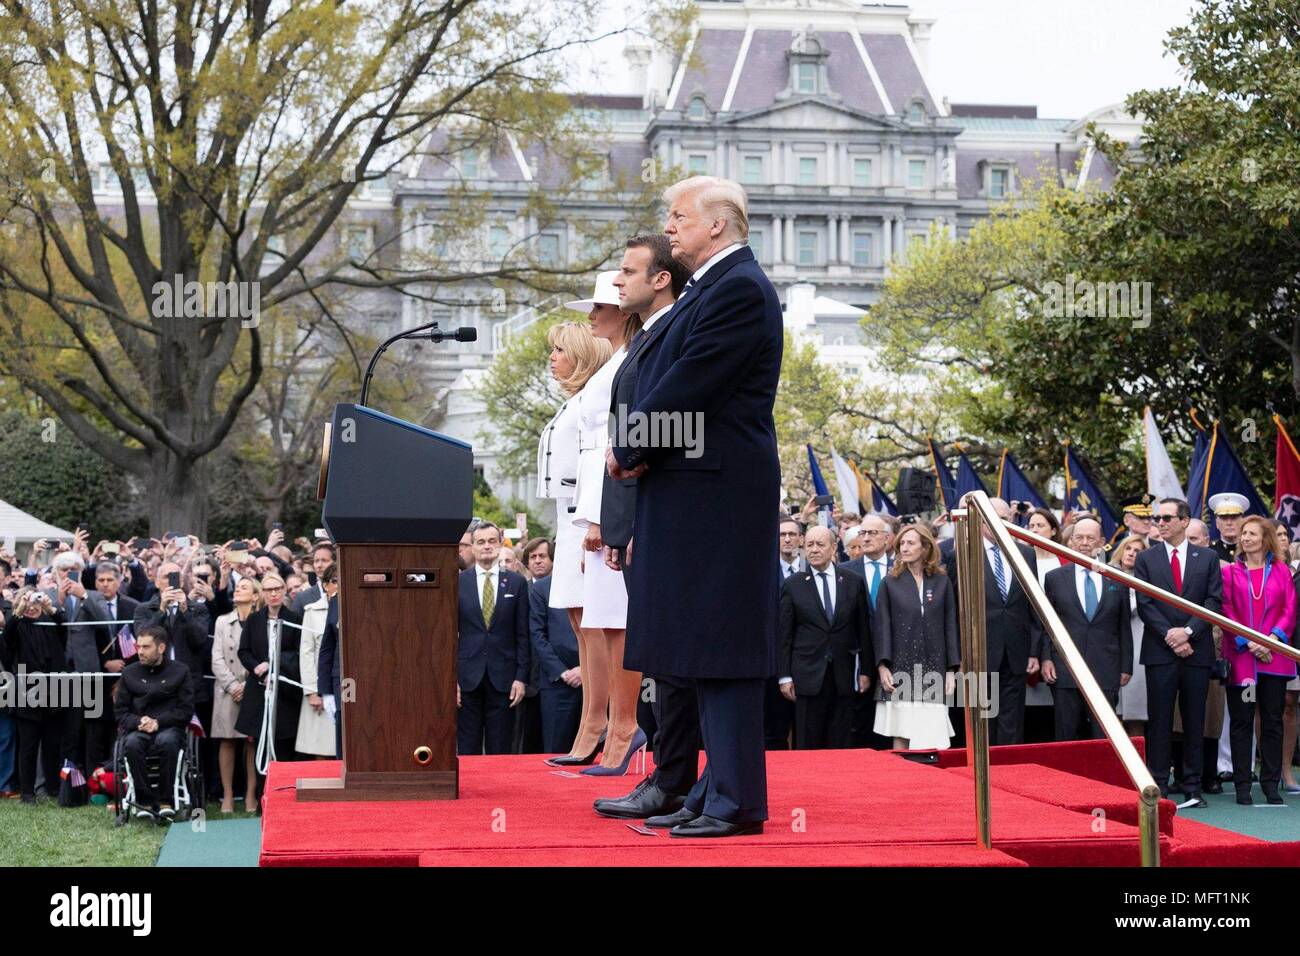 U.S President Donald Trump, right, French President Emmanuel Macron, First Lady Melania Trump and Brigitte Macron, left, stand during the formal arrival ceremony on the South Lawn of the White House April 24, 2018 in Washington, DC.  Macron is on a State Visit to Washington, the first since President Trump took office. Stock Photo